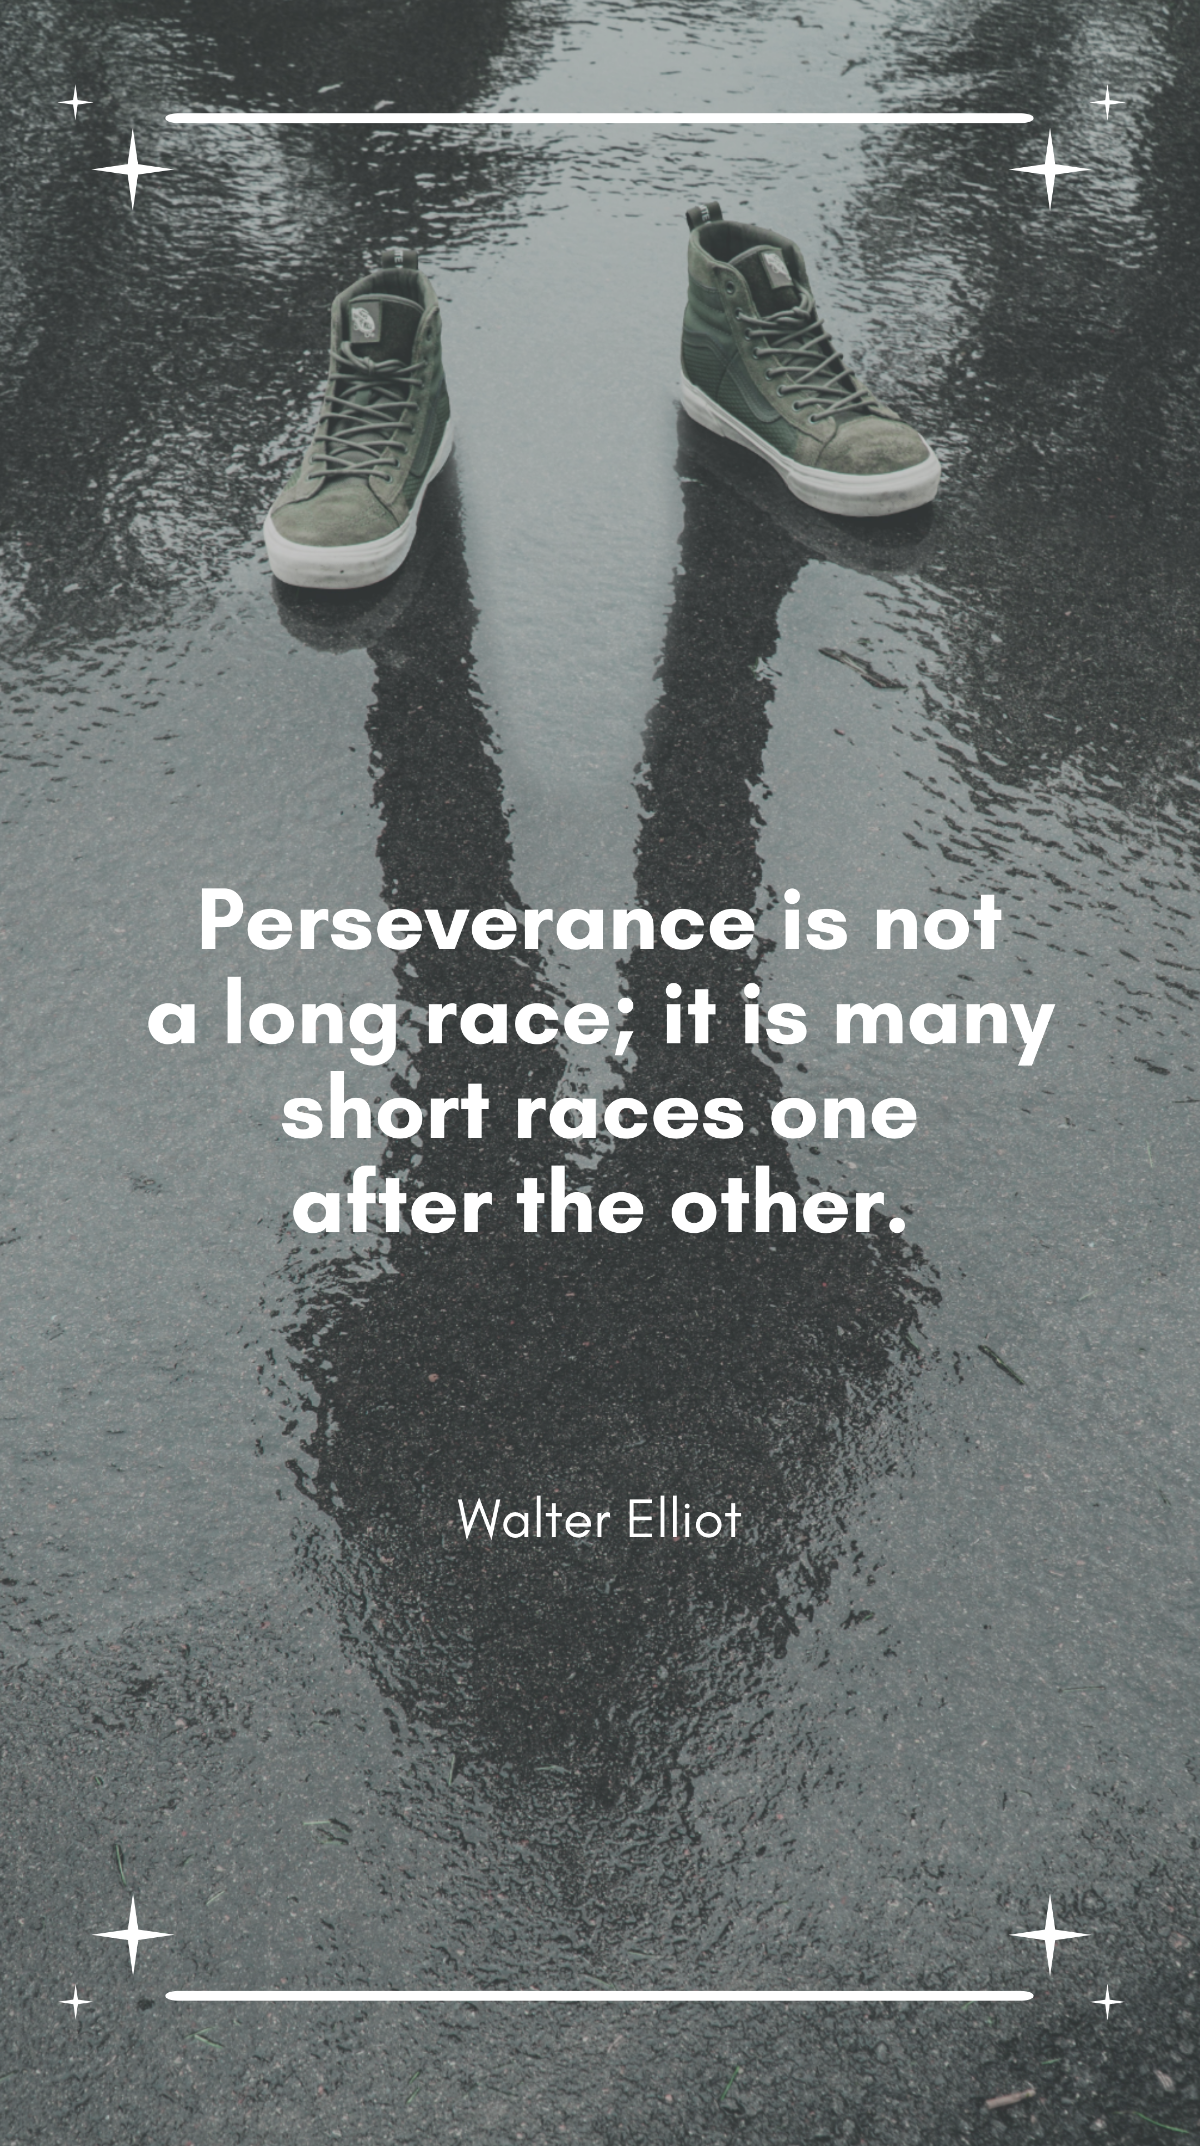 Walter Elliot - Perseverance is not a long race; it is many short races one after the other.